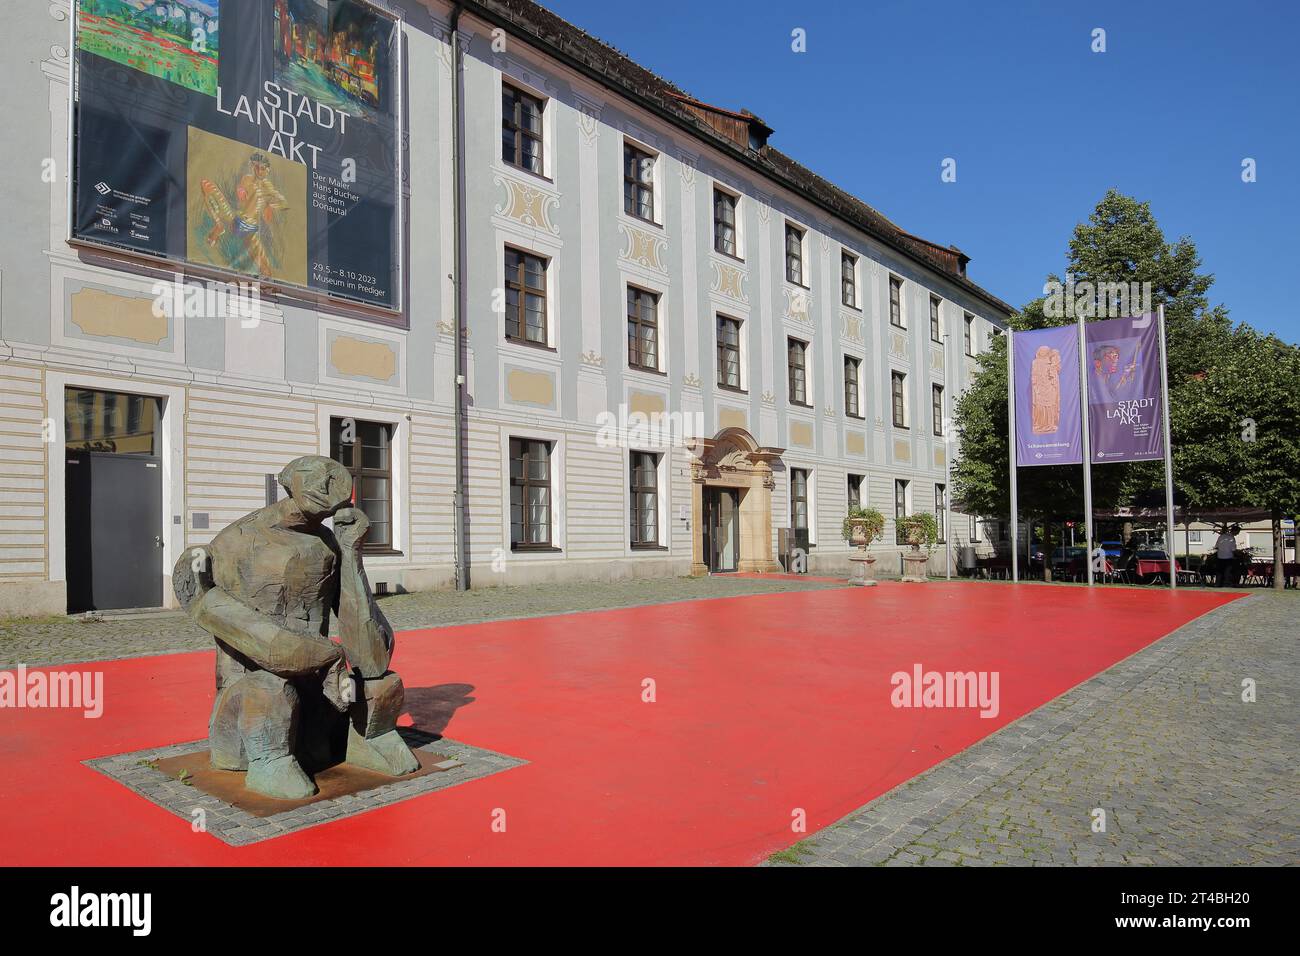 Preacher Museum and former Dominican Monastery and sculpture Nighthart by Dietrich Klinge 2001, flags, banner, inscription, city, country, art, red Stock Photo